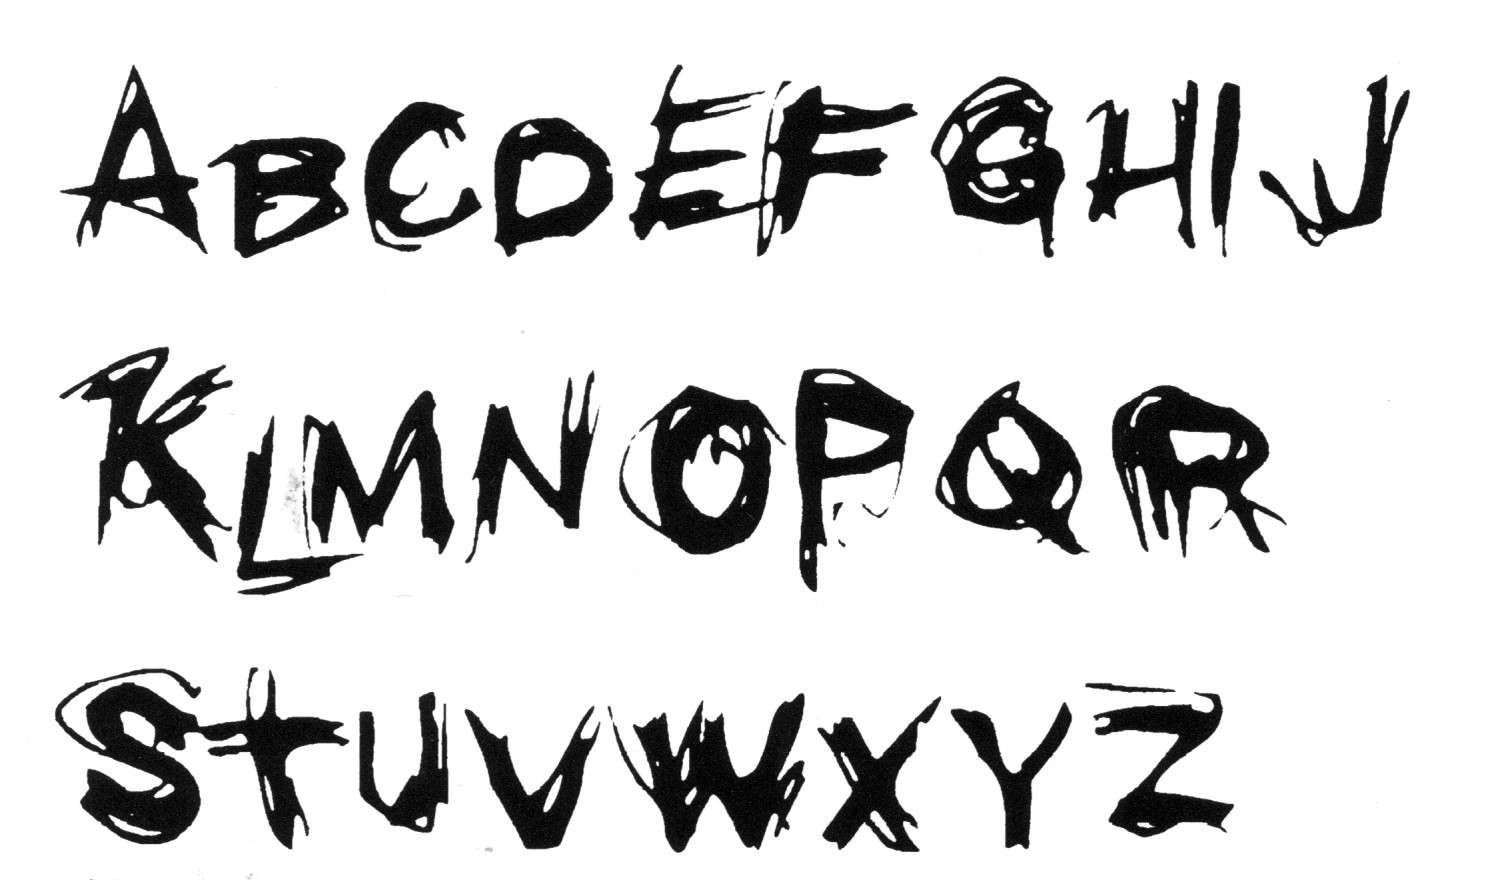 of the grungy Crud font